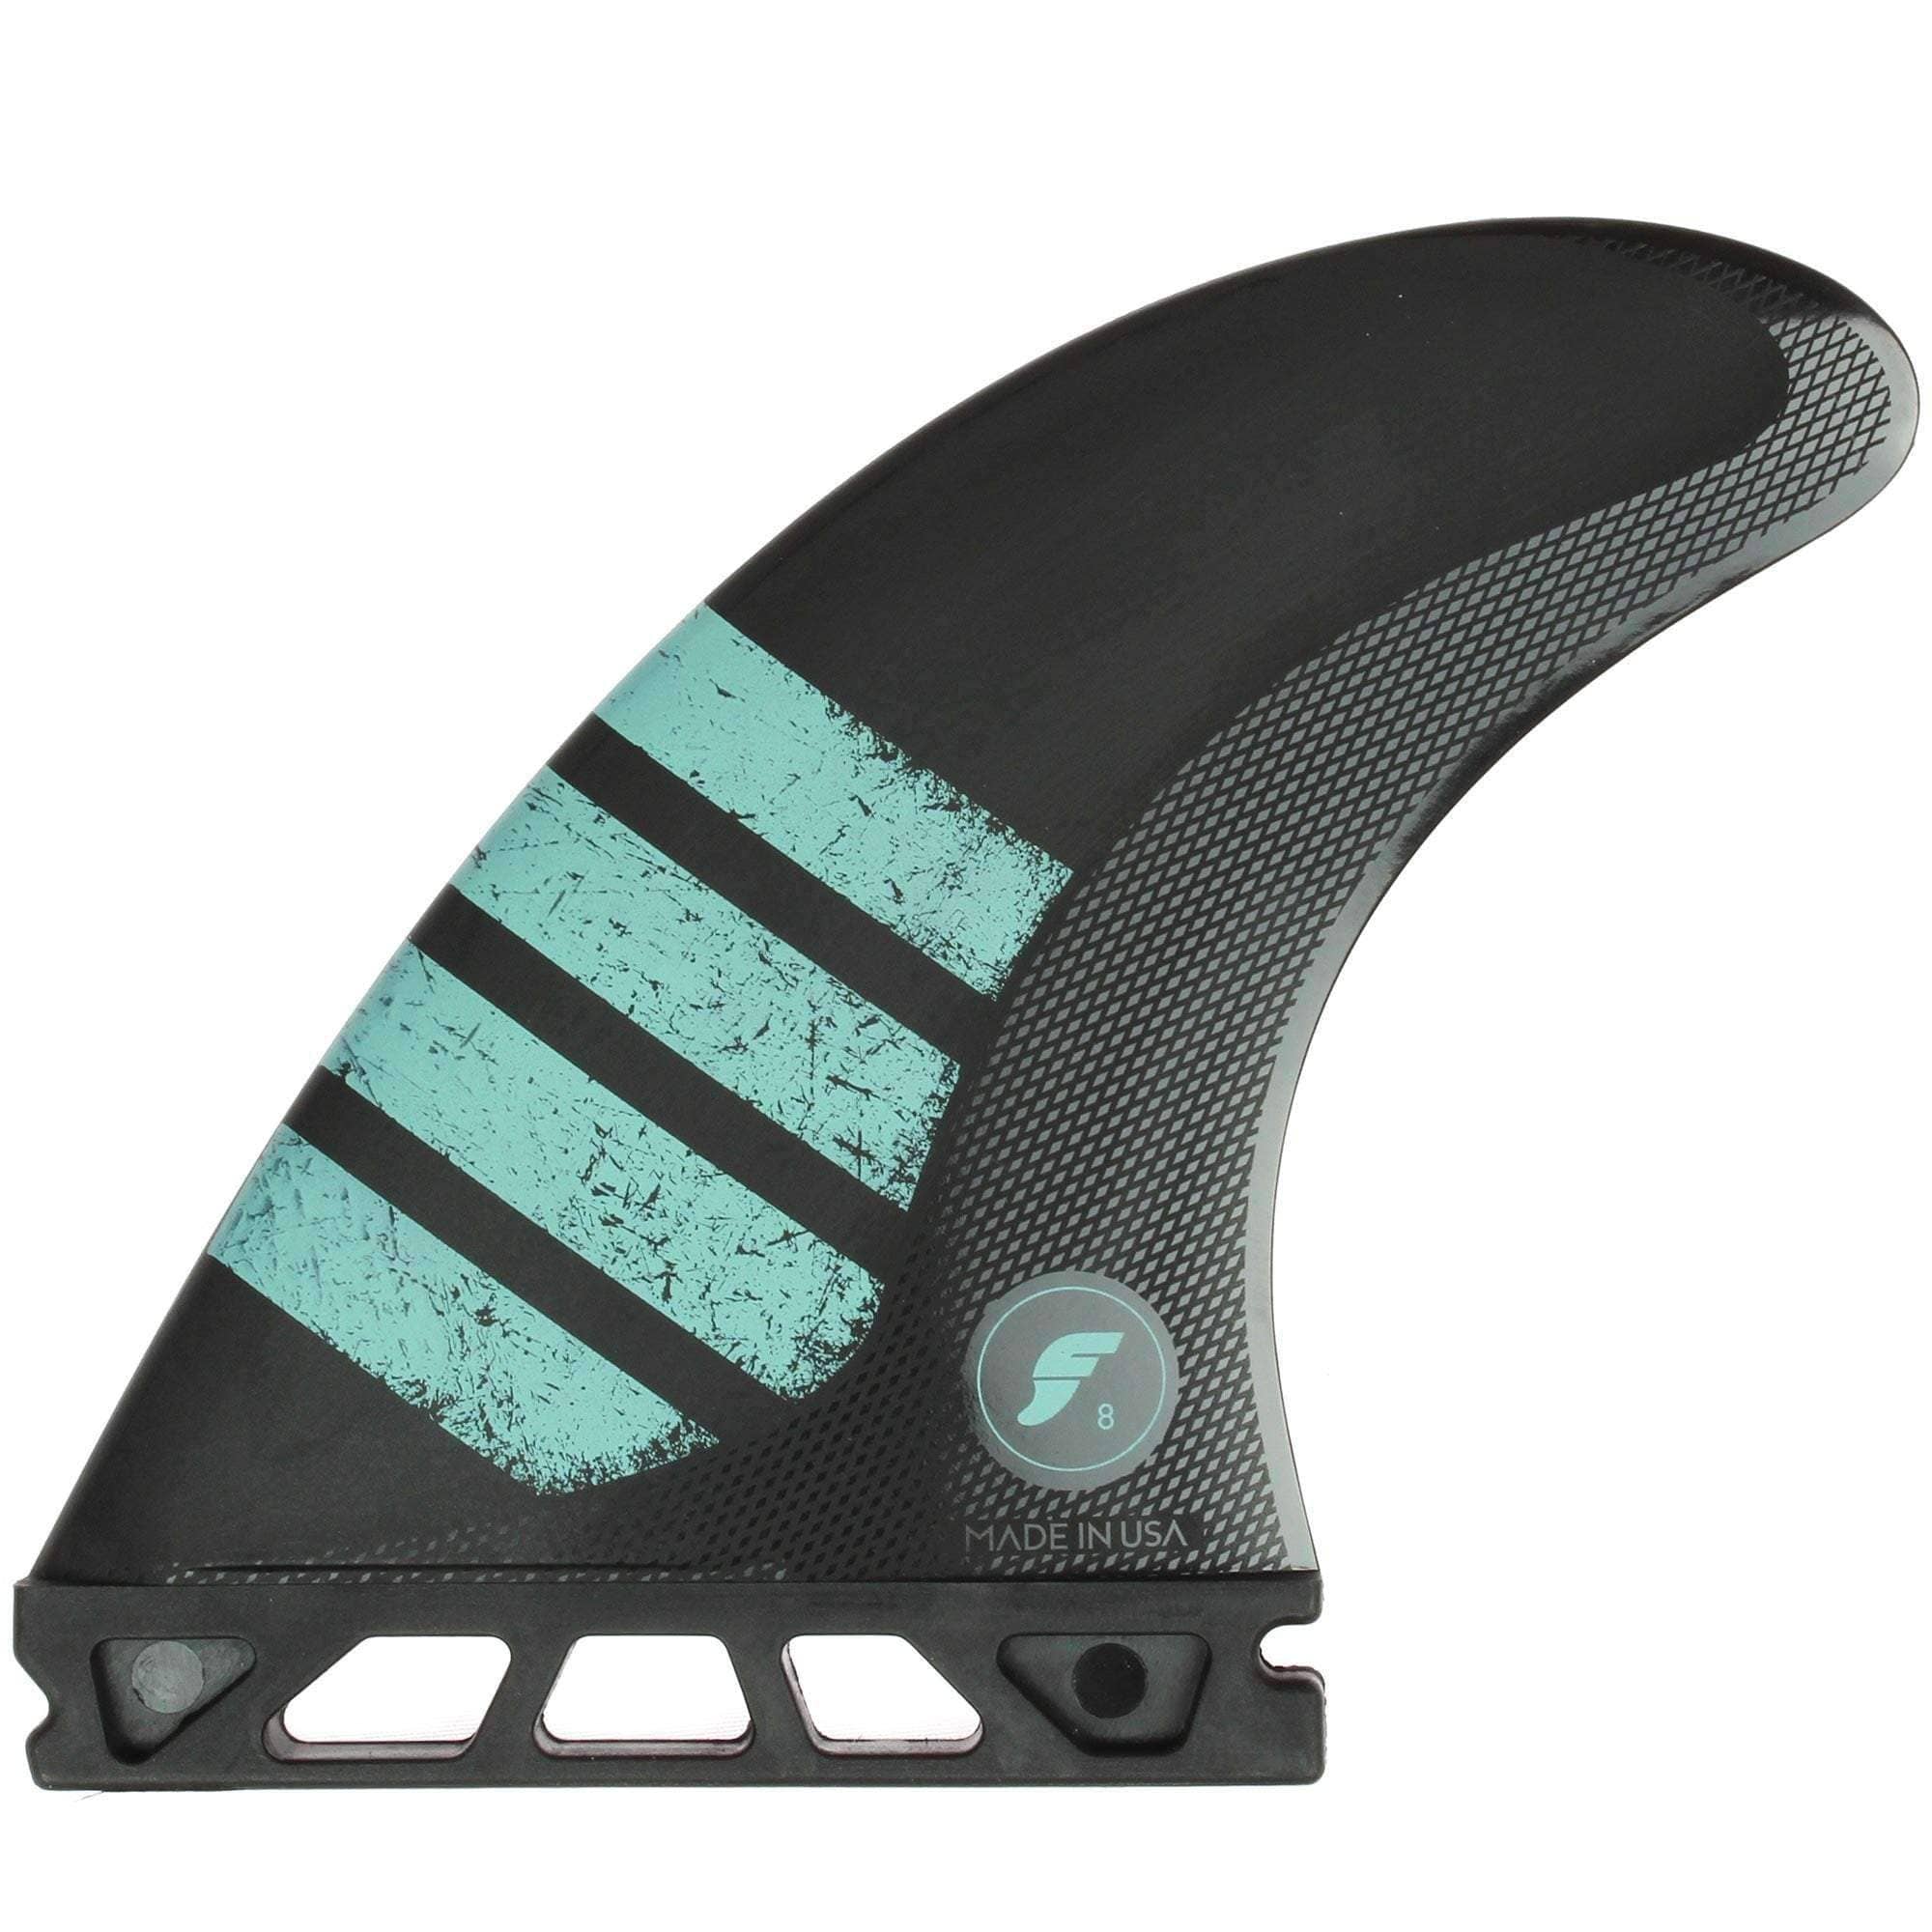 Futures F8 Alpha Large Surfboard Fins Futures Single Tab Fins by Futures Large Fins